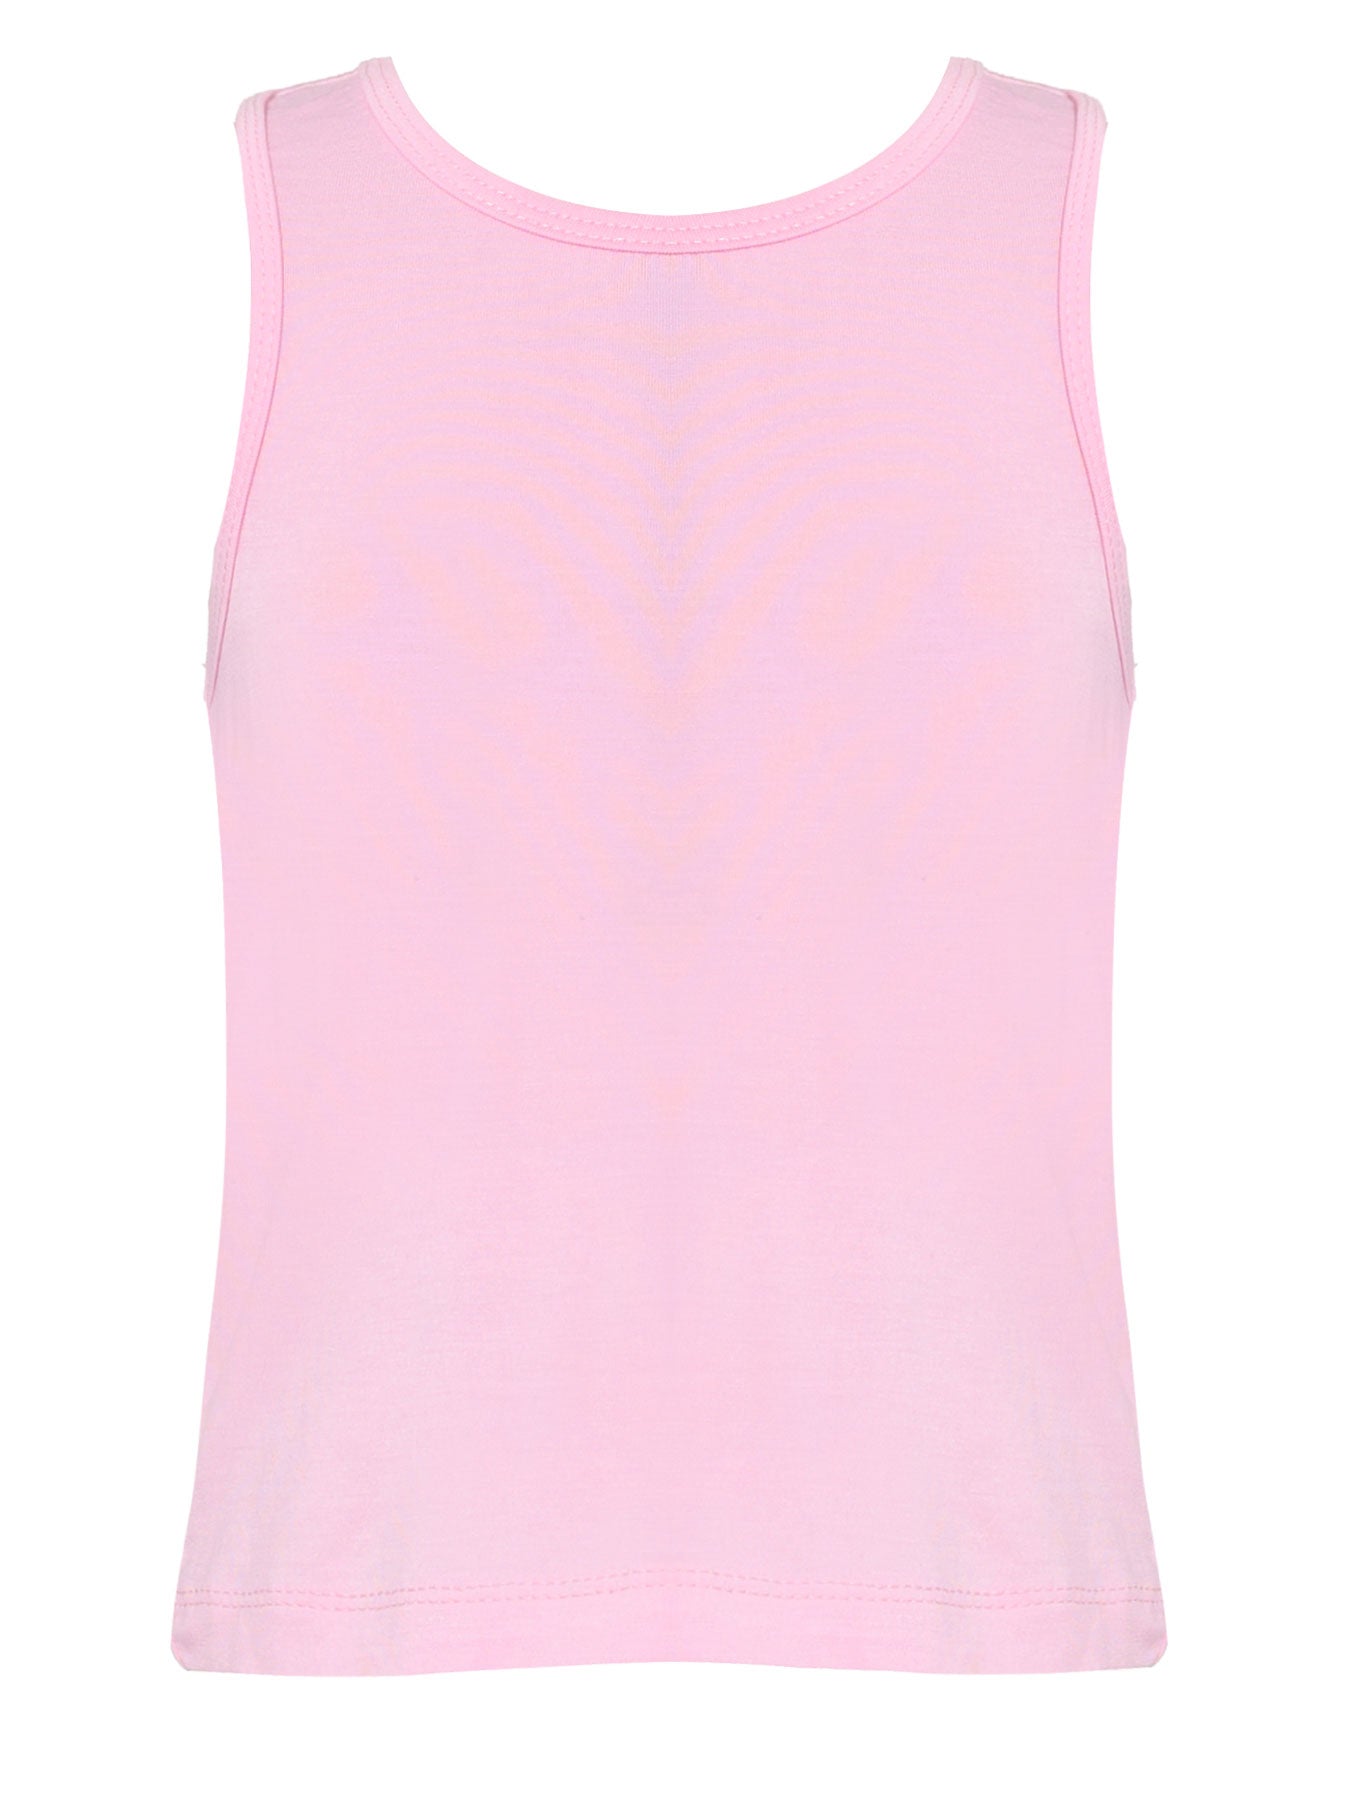 Pink Tank Top for Girls